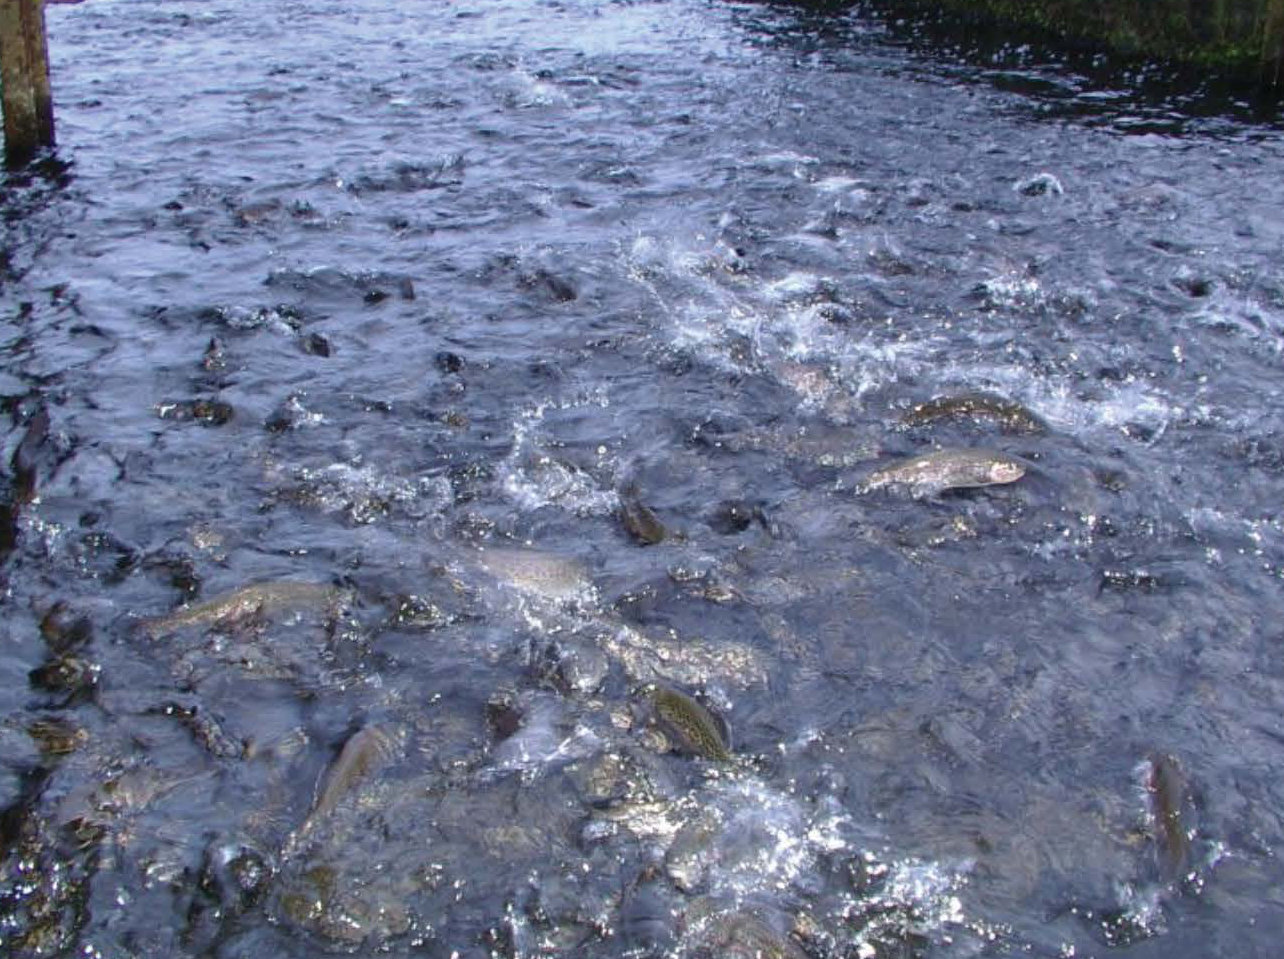 Hatchery trout feeding at the surface; does this behavior influence feeding in the wild?